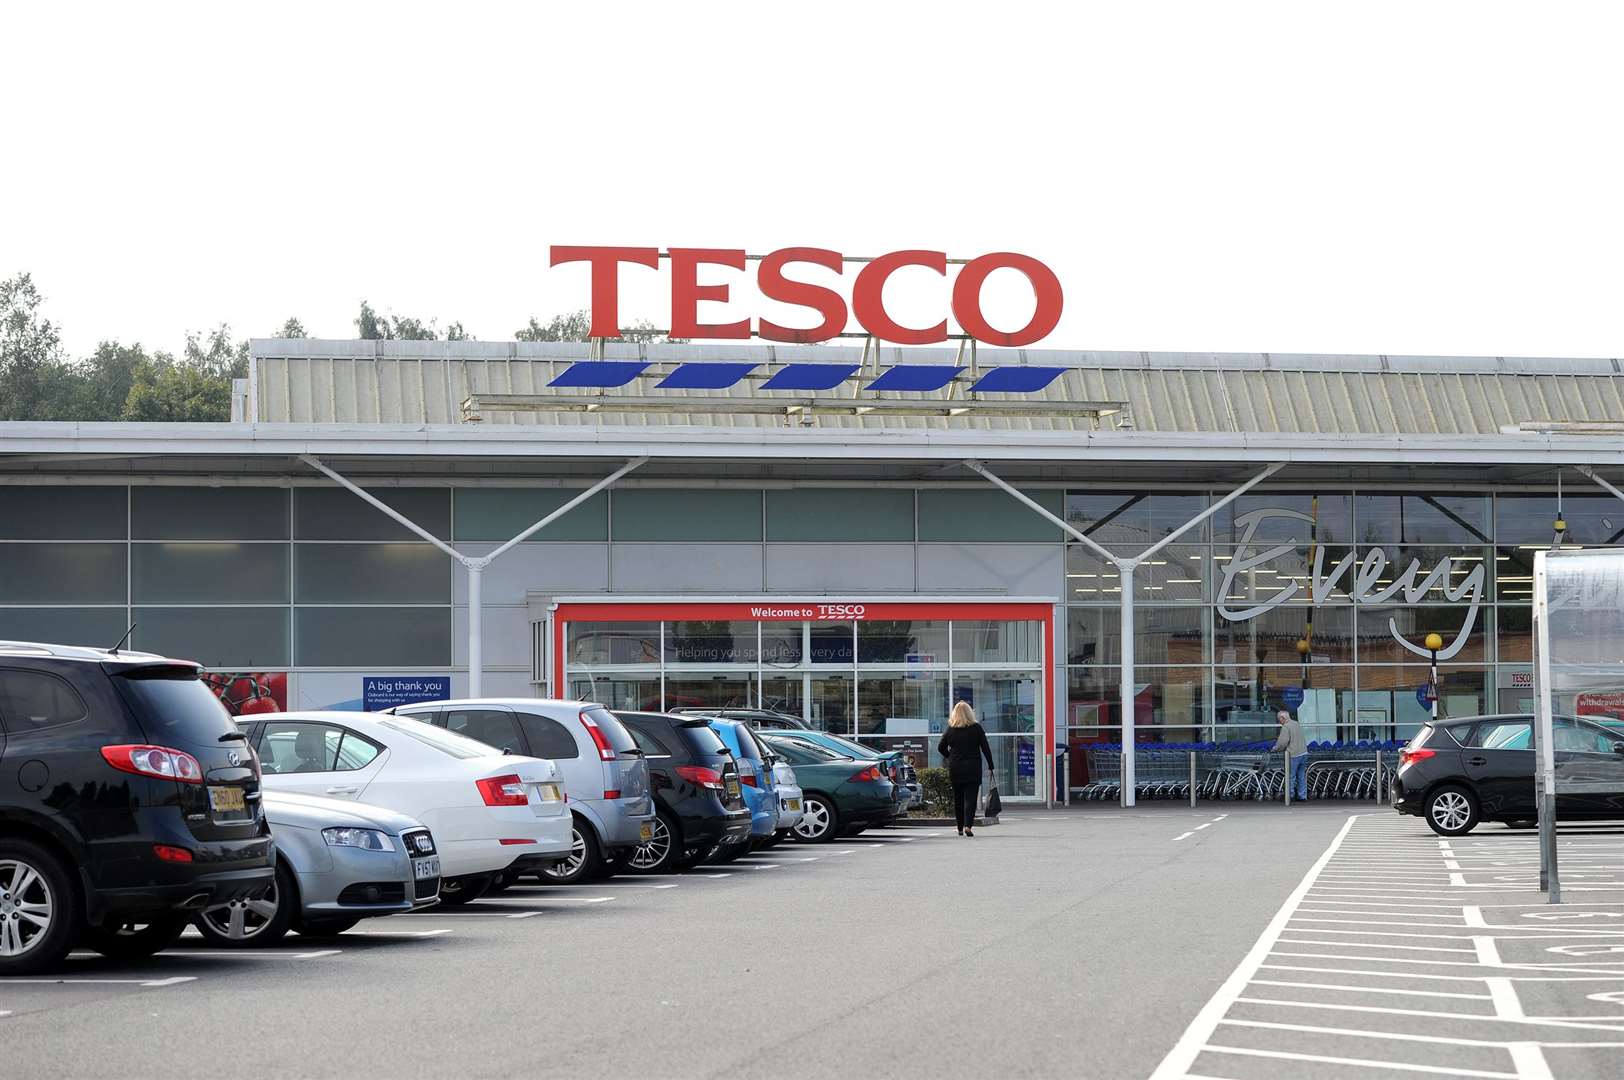 Tesco has benefited from business rates relief